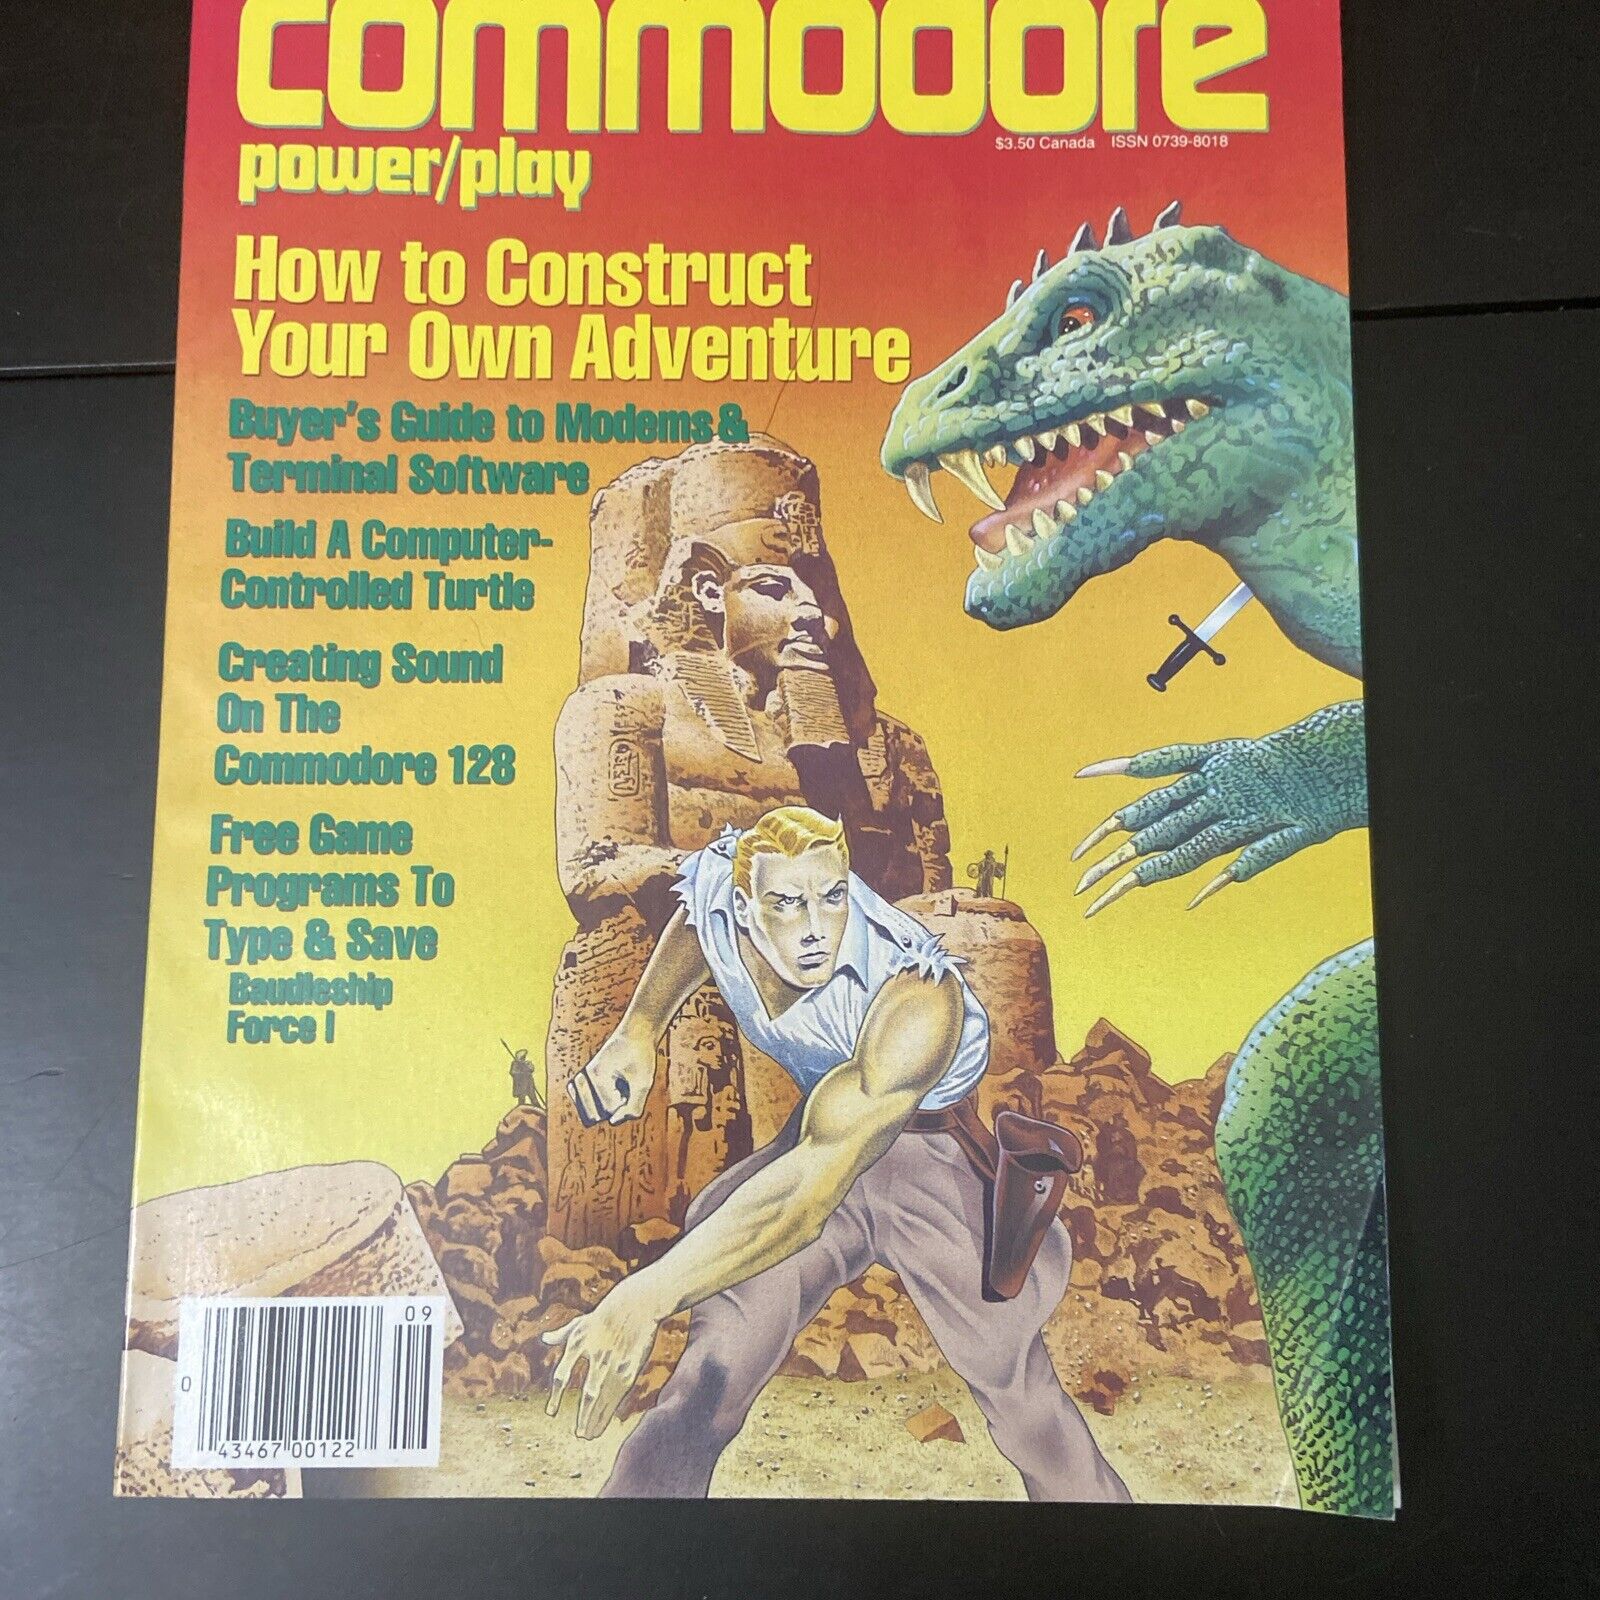 Vintage Commodore Power/Play Commodore Microcomputers Magazines 1985 Power Play